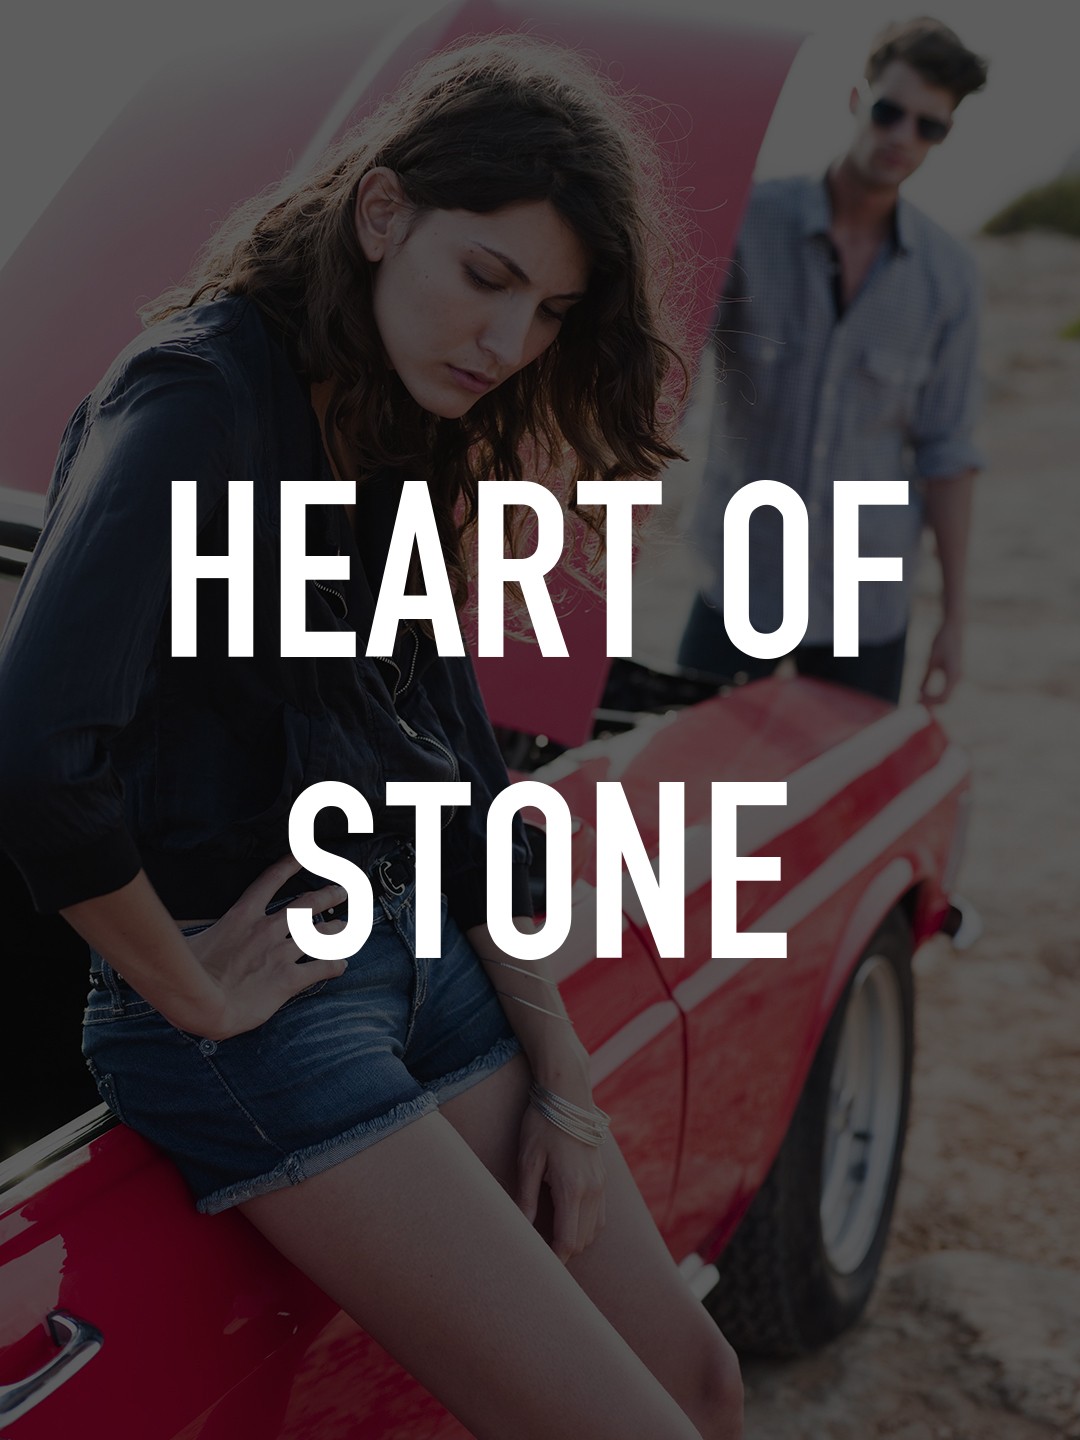 Heart of Stone receives brutal Rotten Tomatoes score